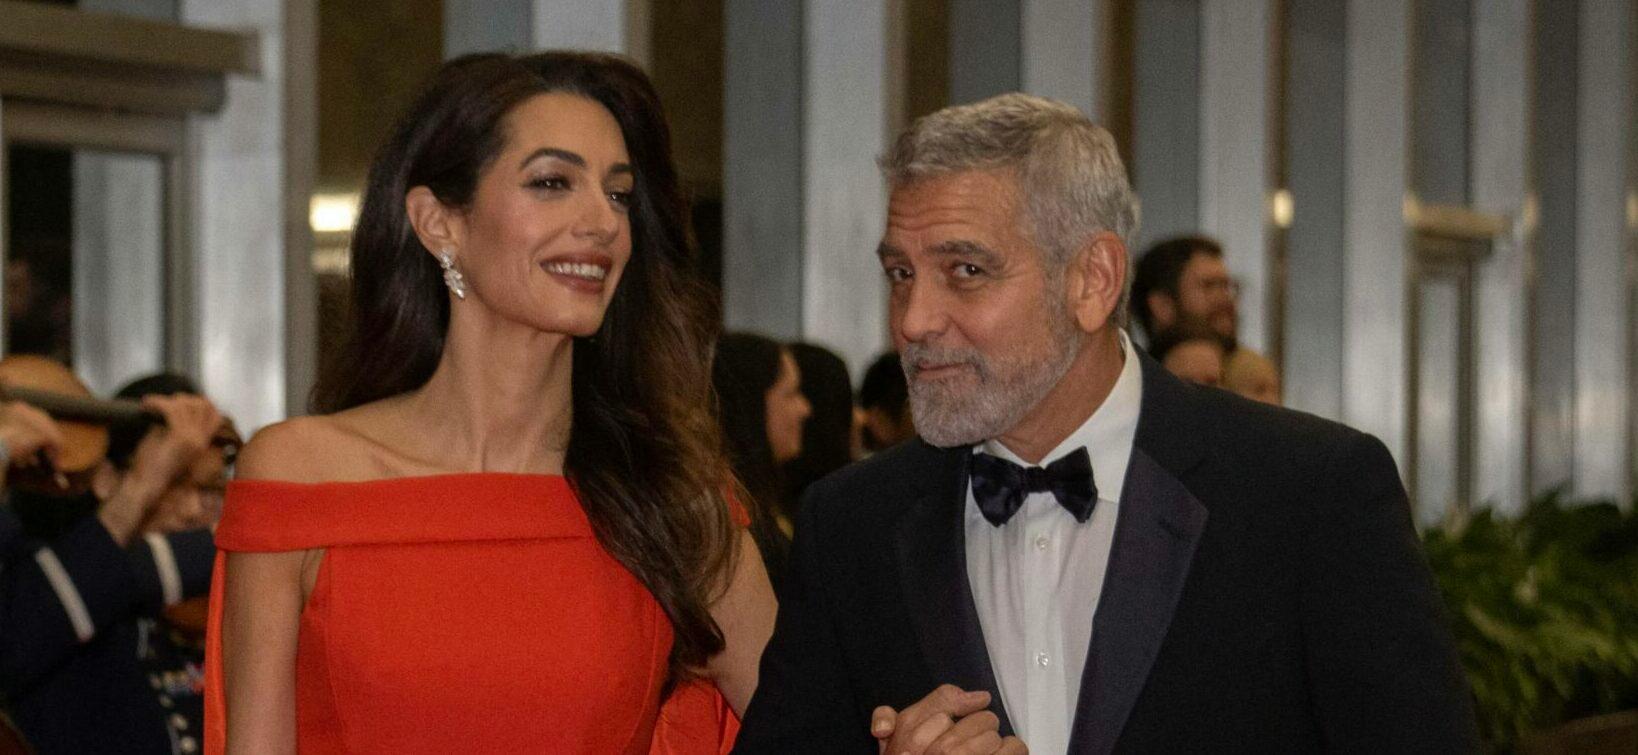 George Clooney won hearts at the 45th Kennedy Center Honors